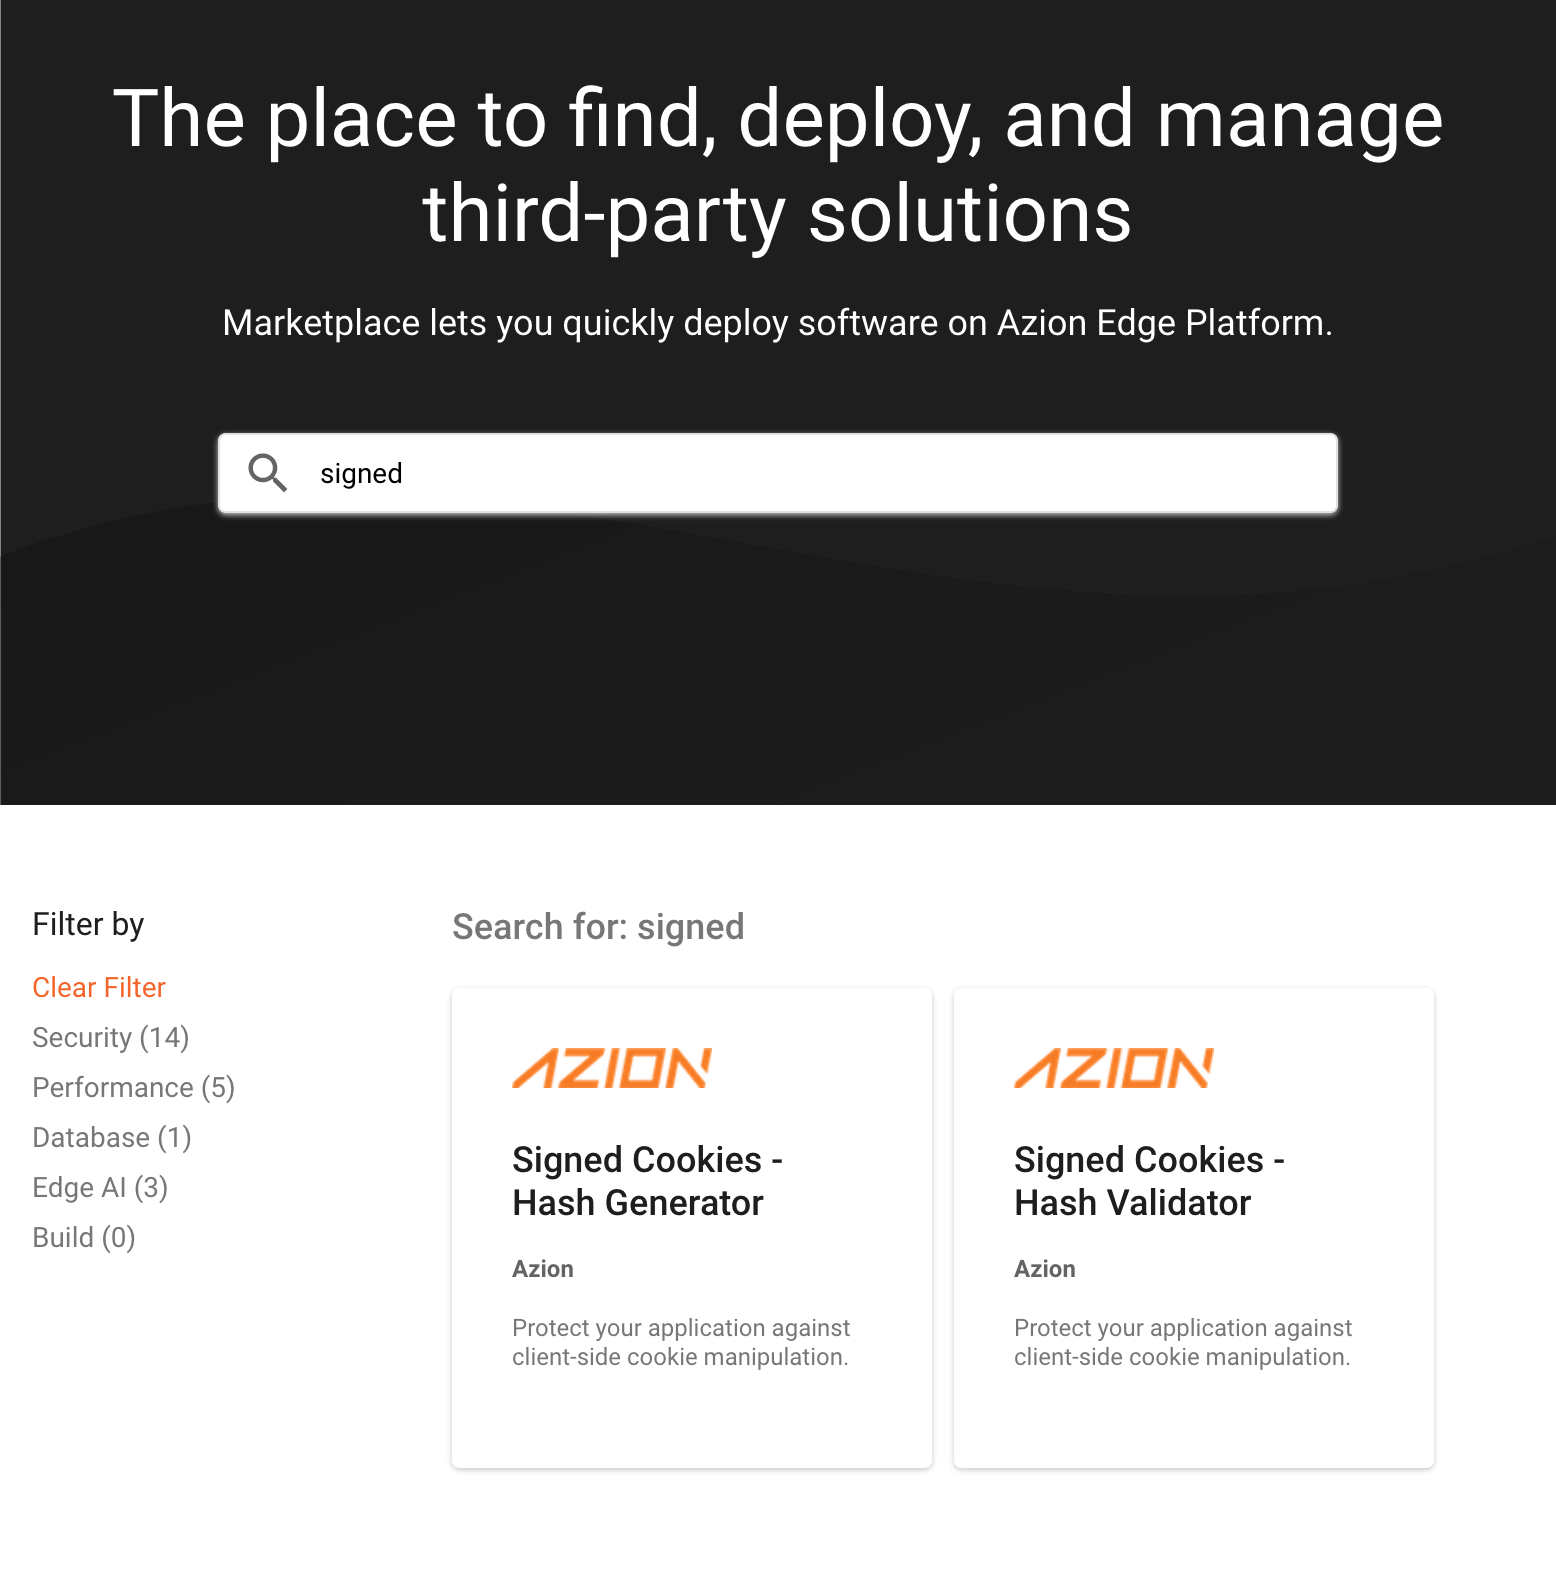 Image from Azion's Marketplace page